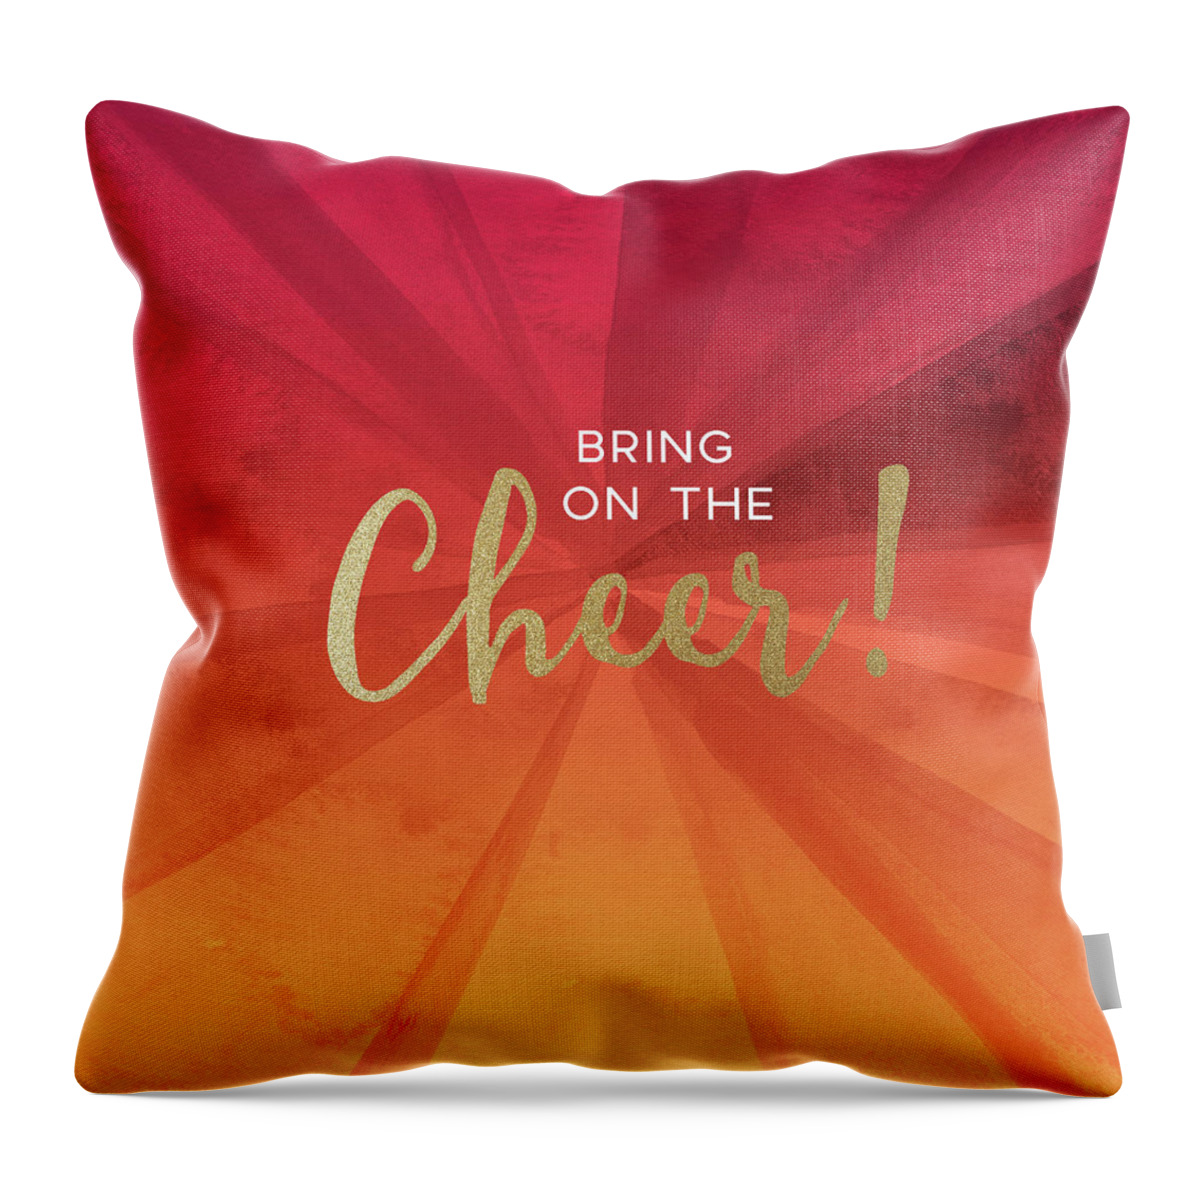 Cheer Throw Pillow featuring the mixed media Bring On The Cheer -Art by Linda Woods by Linda Woods